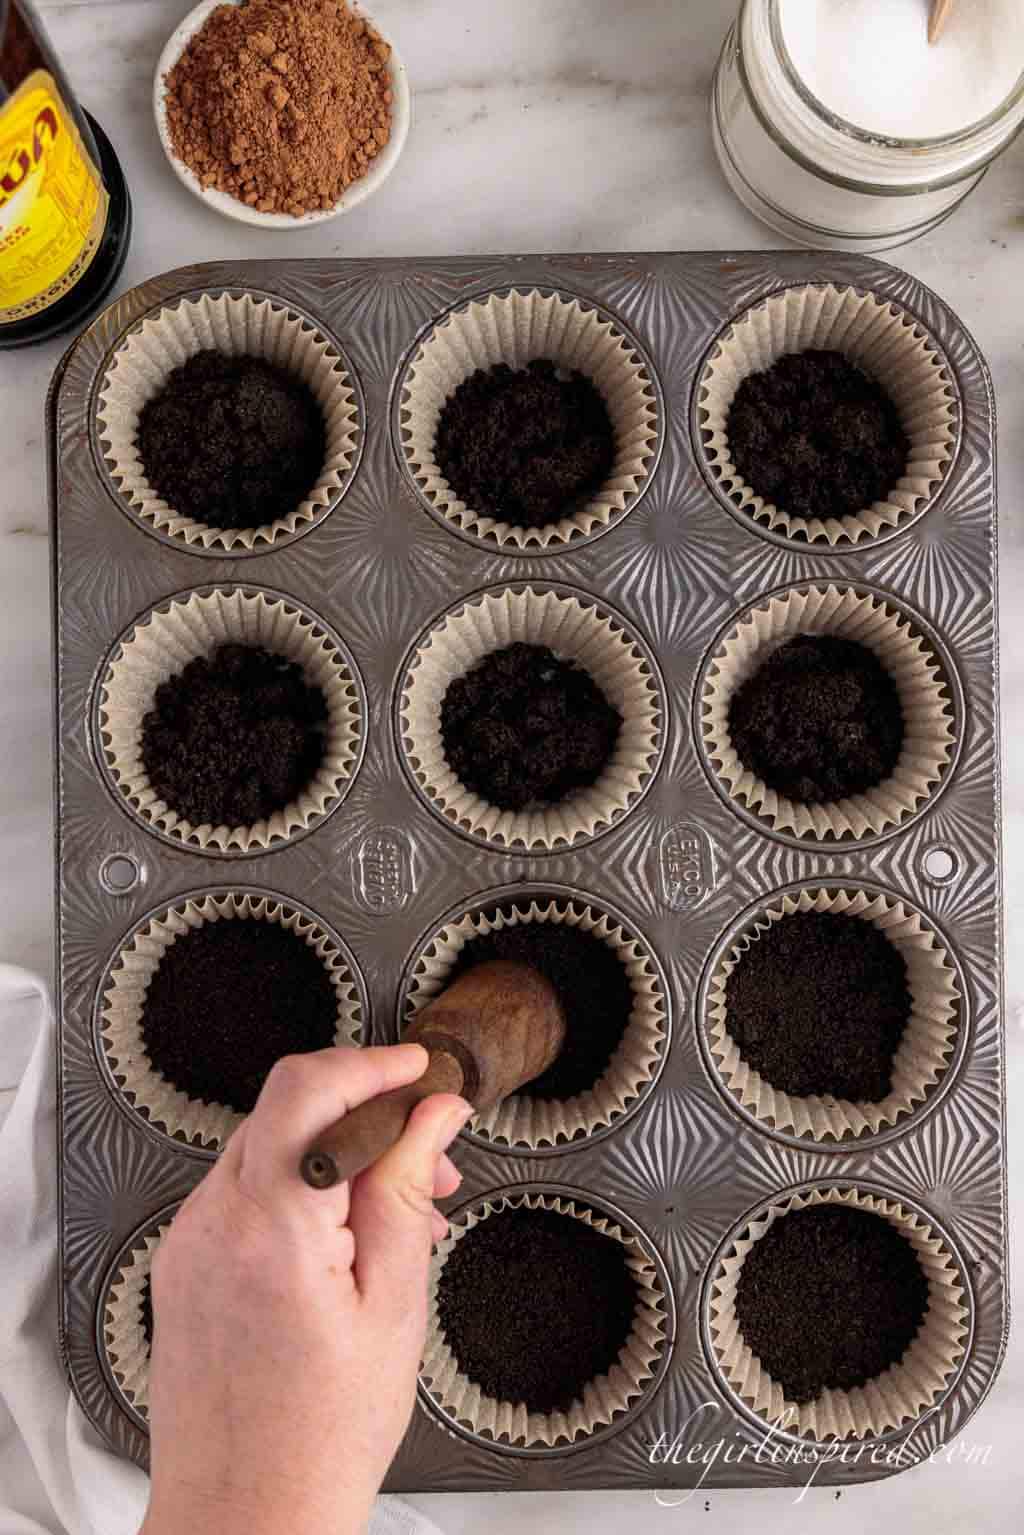 tamping down oreo cookie crumbs in muffin tin cups.